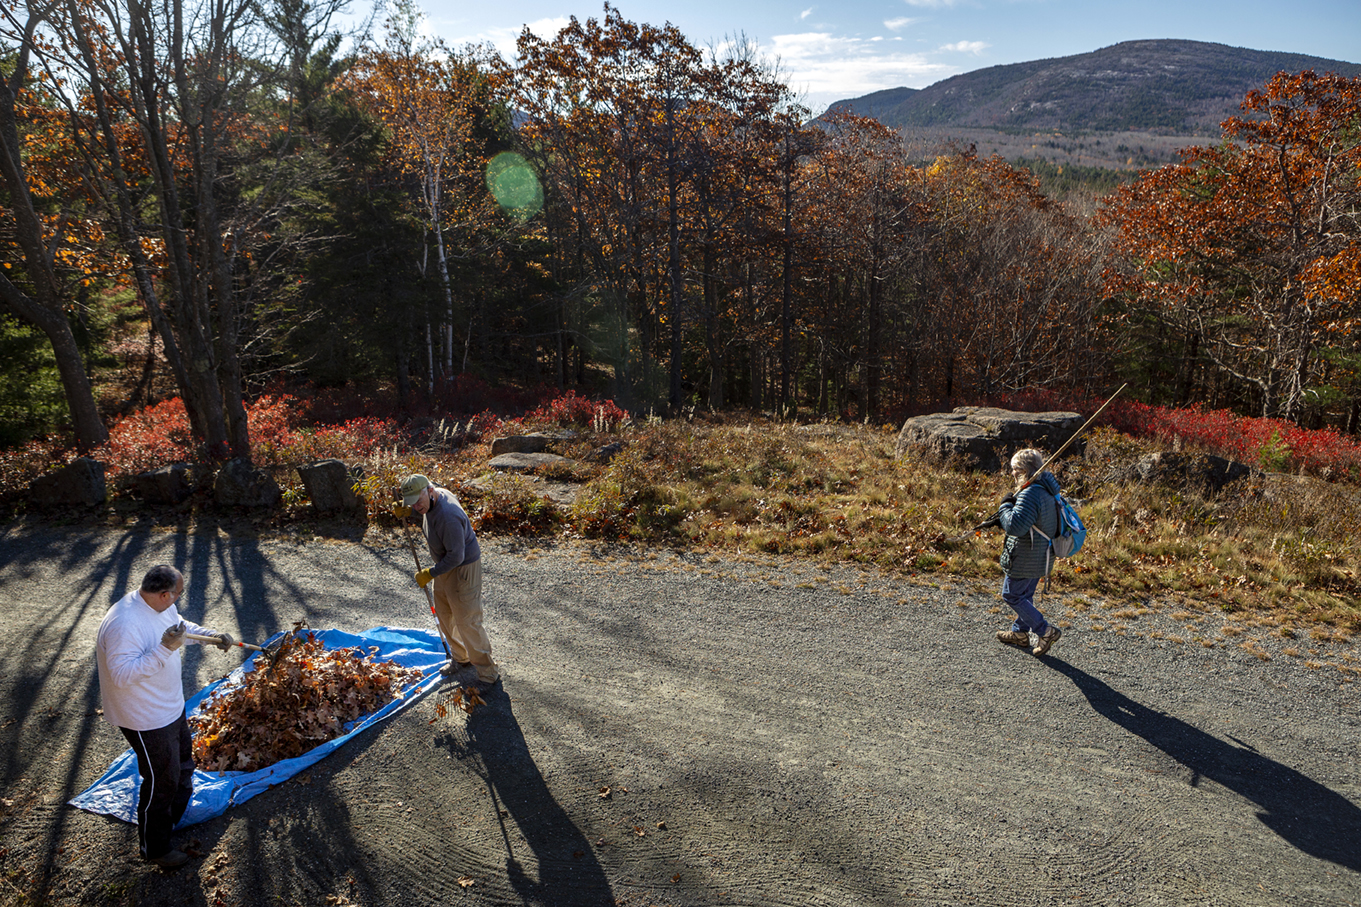 John Khairallah (left), and George Mitchell rack leaves onto a tarp while Billie Mitchell walks to a new section while working to clear leaves off the carriage road as part of the West Eden Friends volunteer during Friends of Acadia’s annual Take Pride in Acadia Day